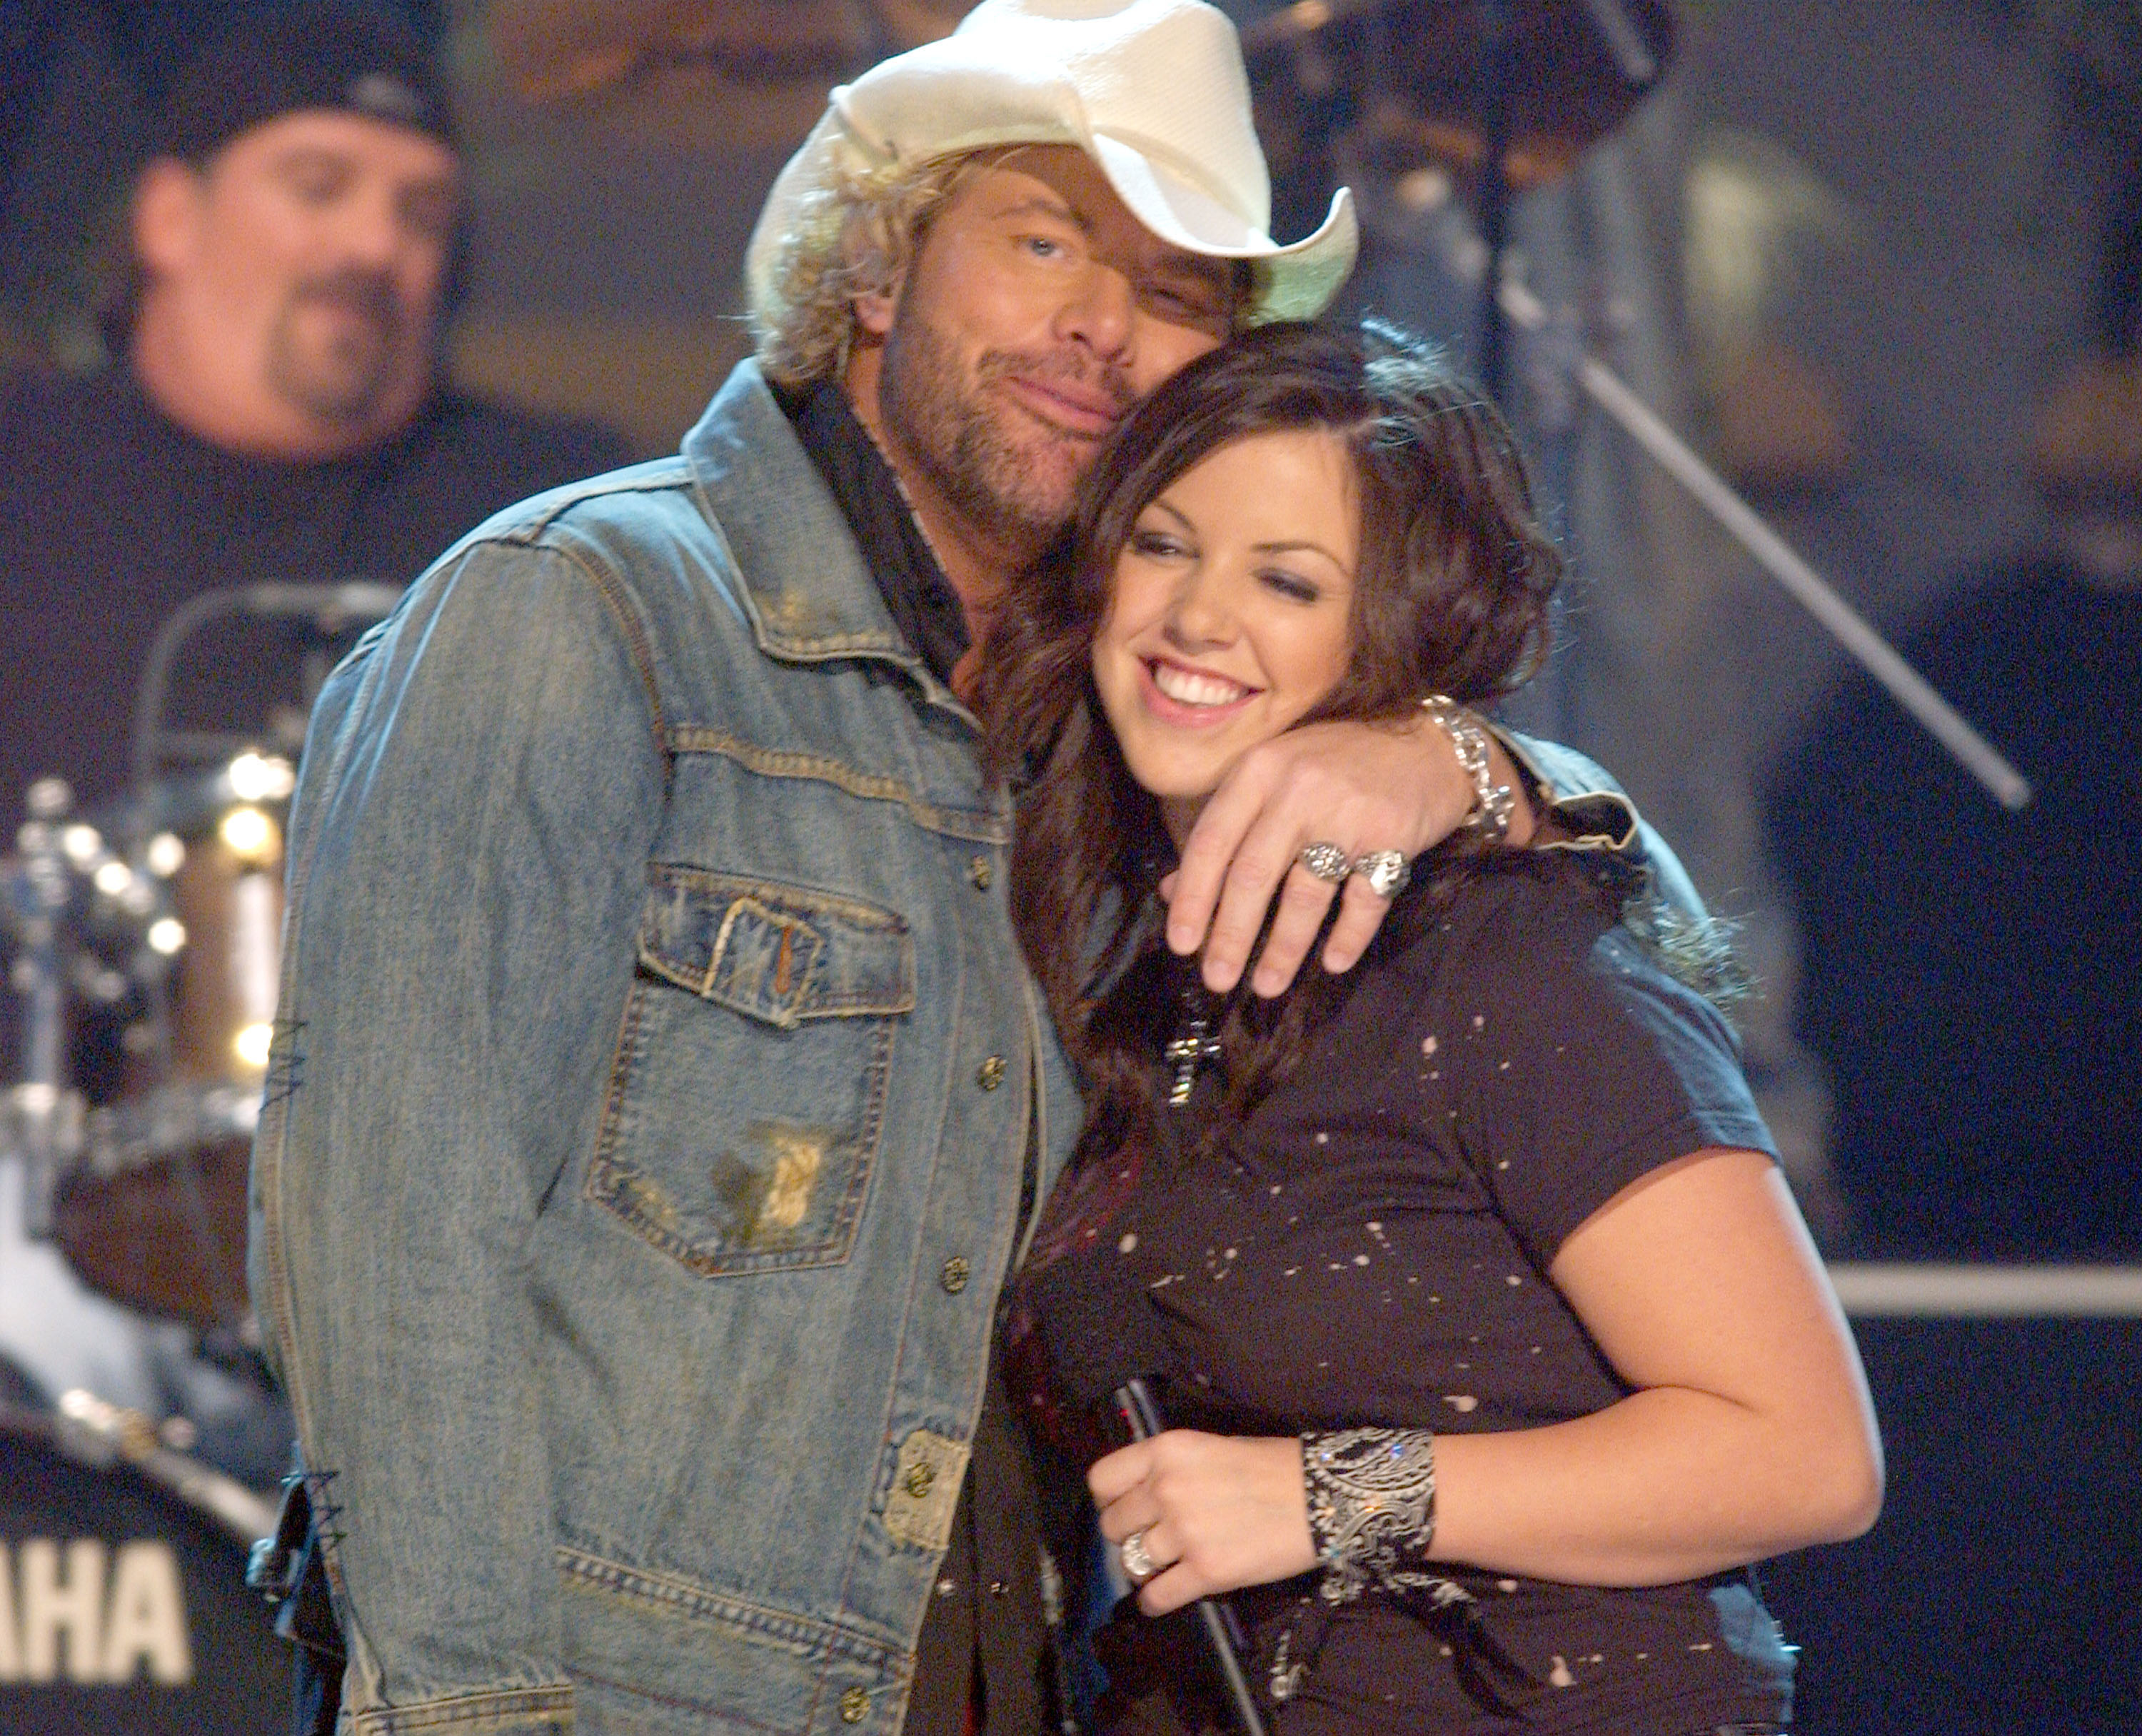 Toby and Krystal Keith at the 38th Annual Country Music Awards in Nashville, Tennessee in 2004. | Source: Getty Images